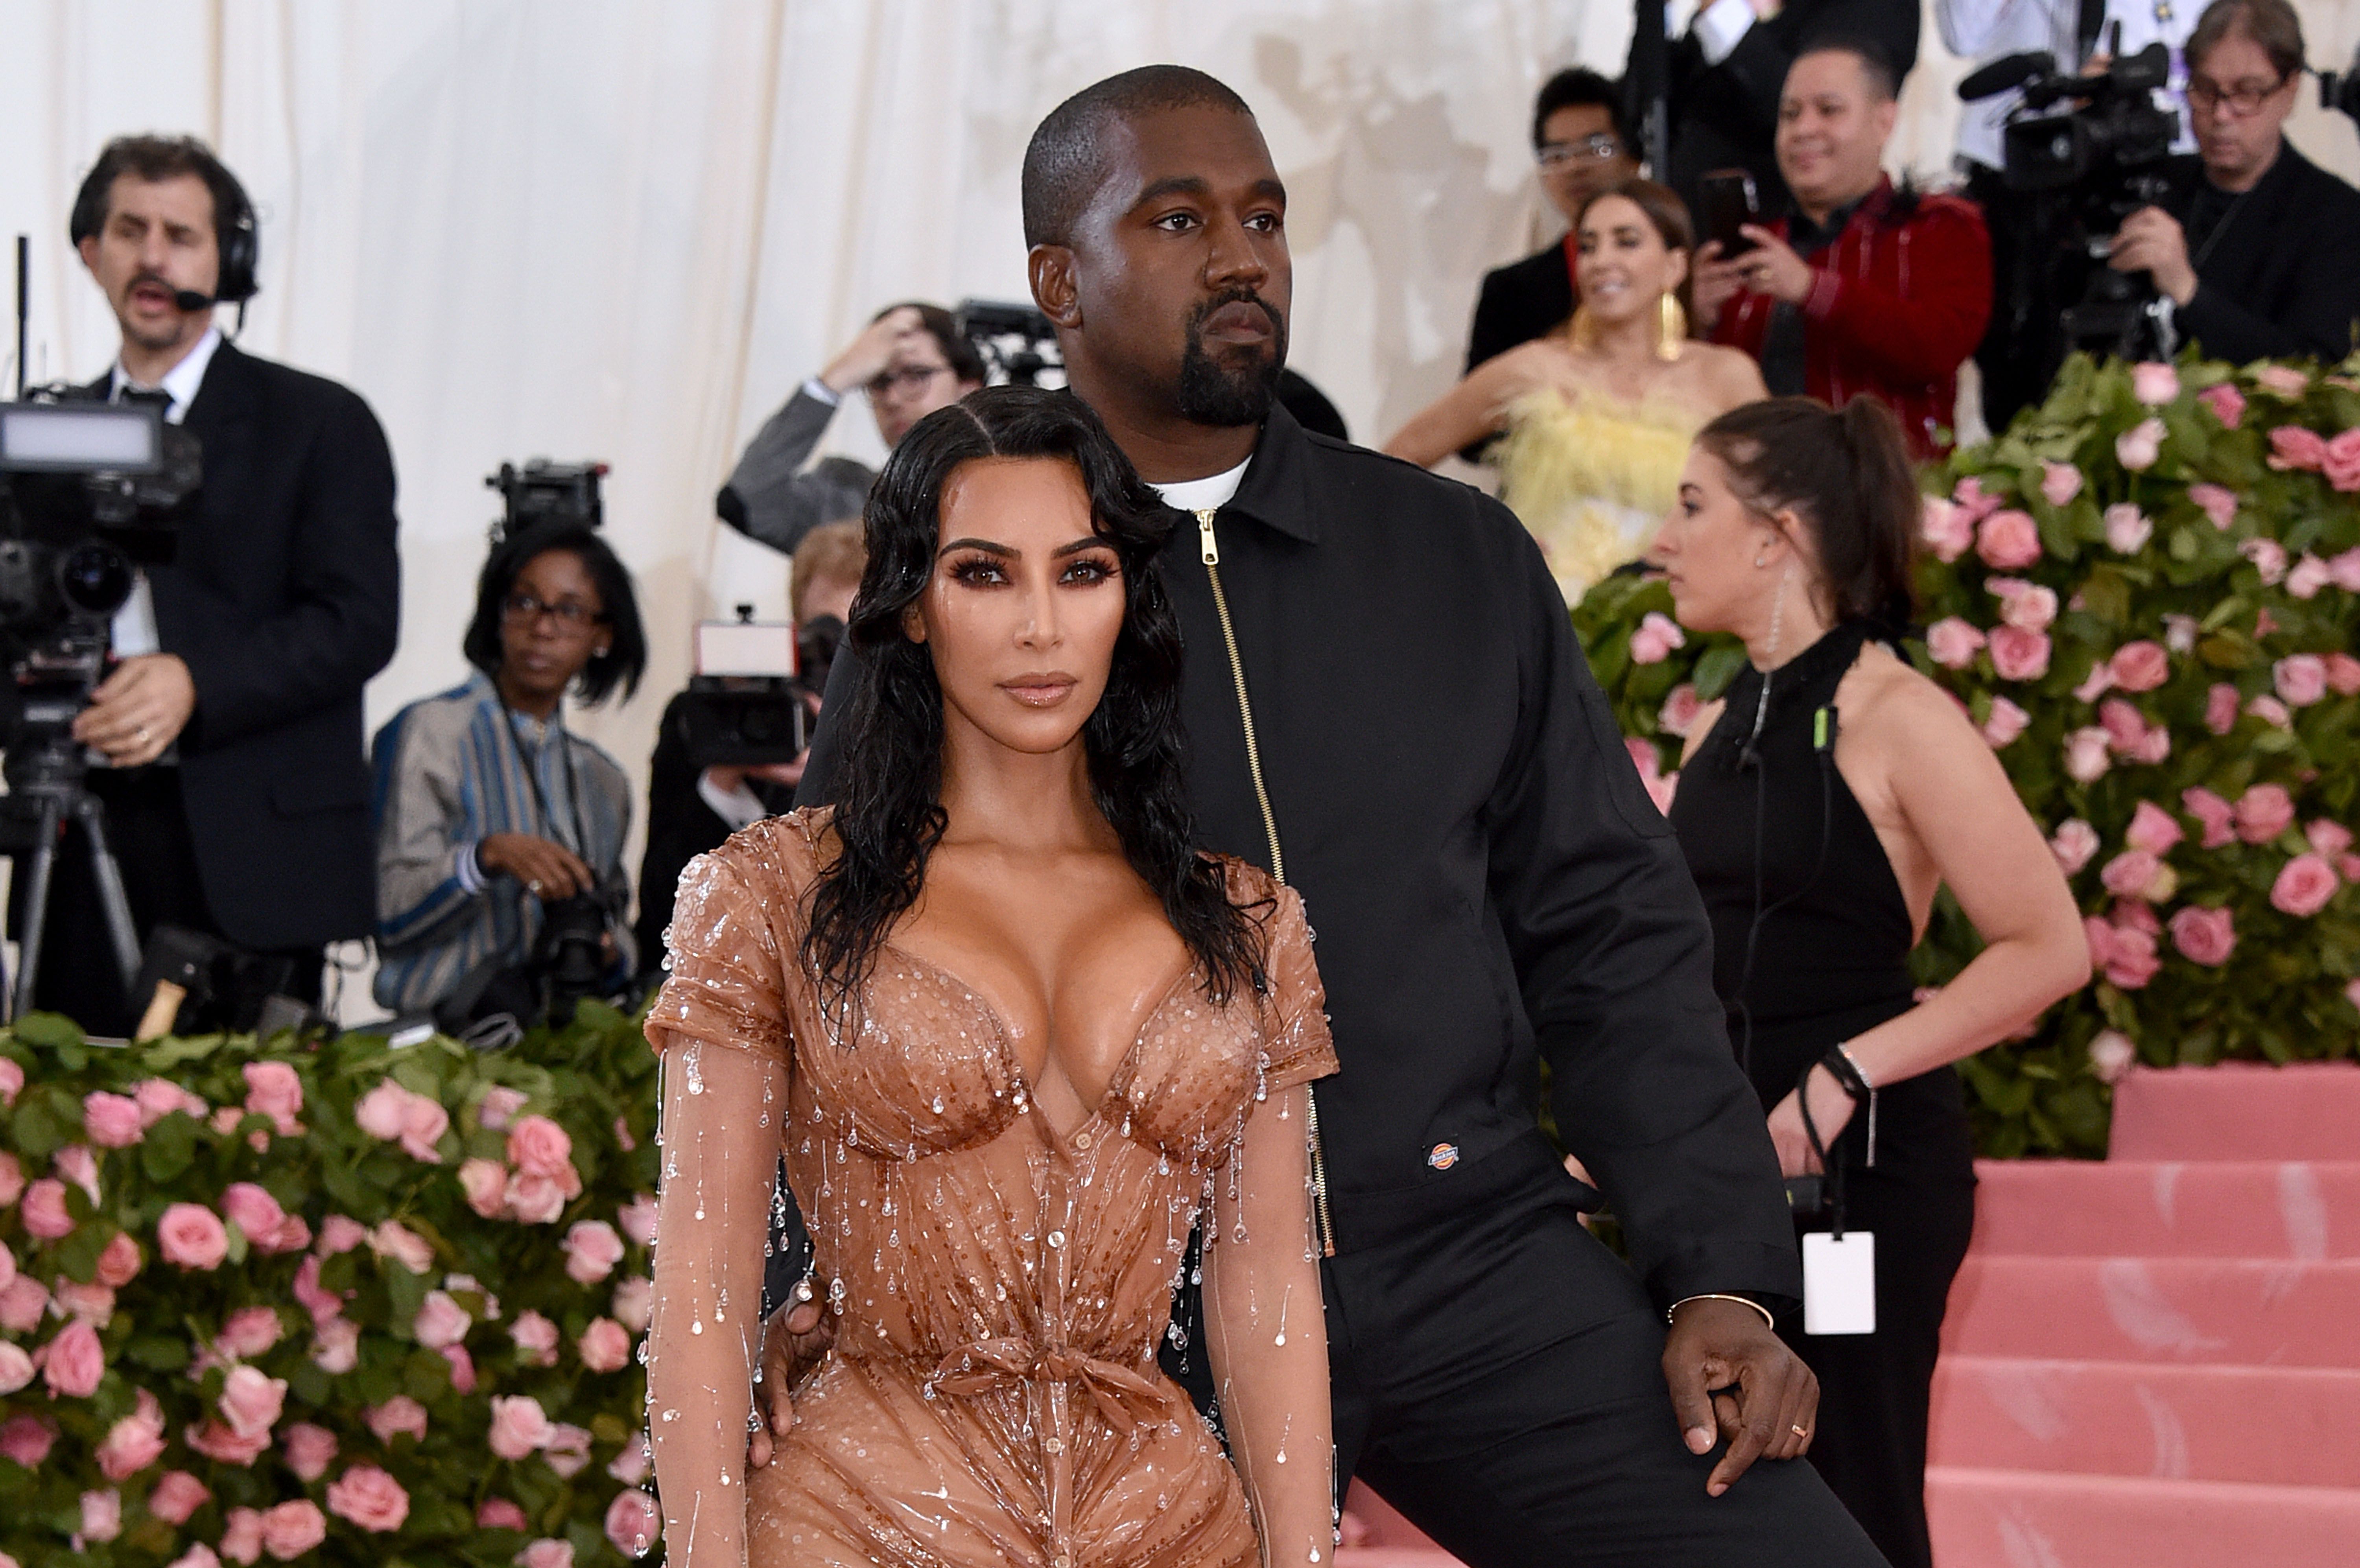 Kim Kardashian West and Kanye West during The 2019 Met Gala Celebrating Camp: Notes on Fashion at Metropolitan Museum of Art on May 06, 2019 in New York City. | Source: Getty Images